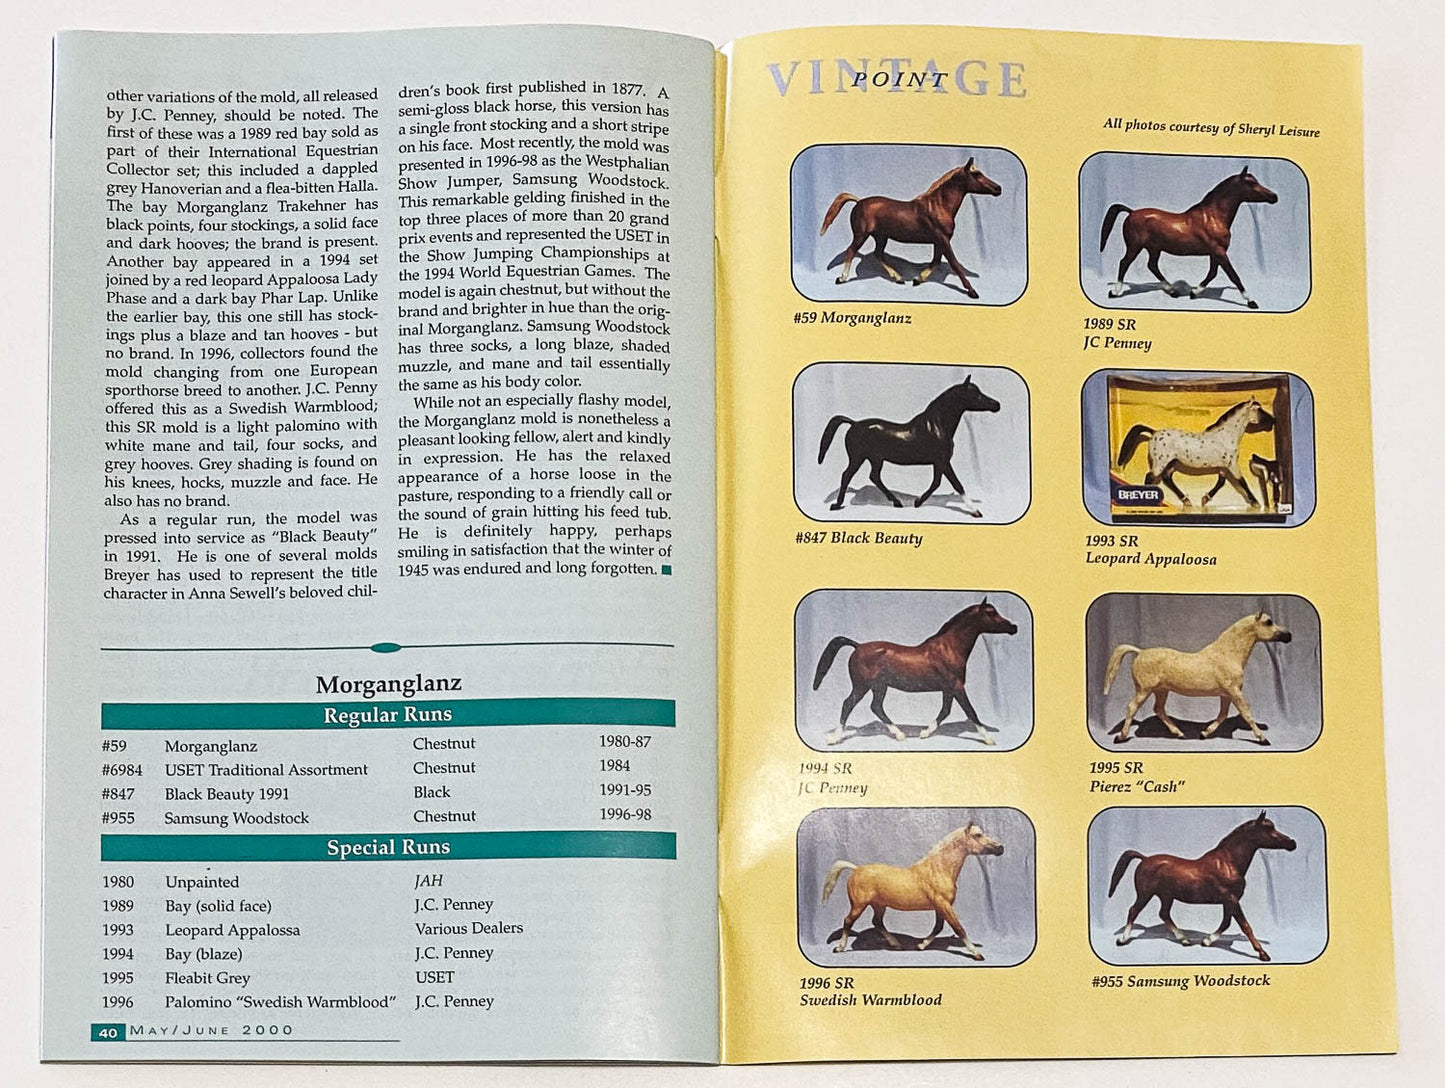 Just About Horses Magazine Vol. 27, No. 3, 2000 May/June